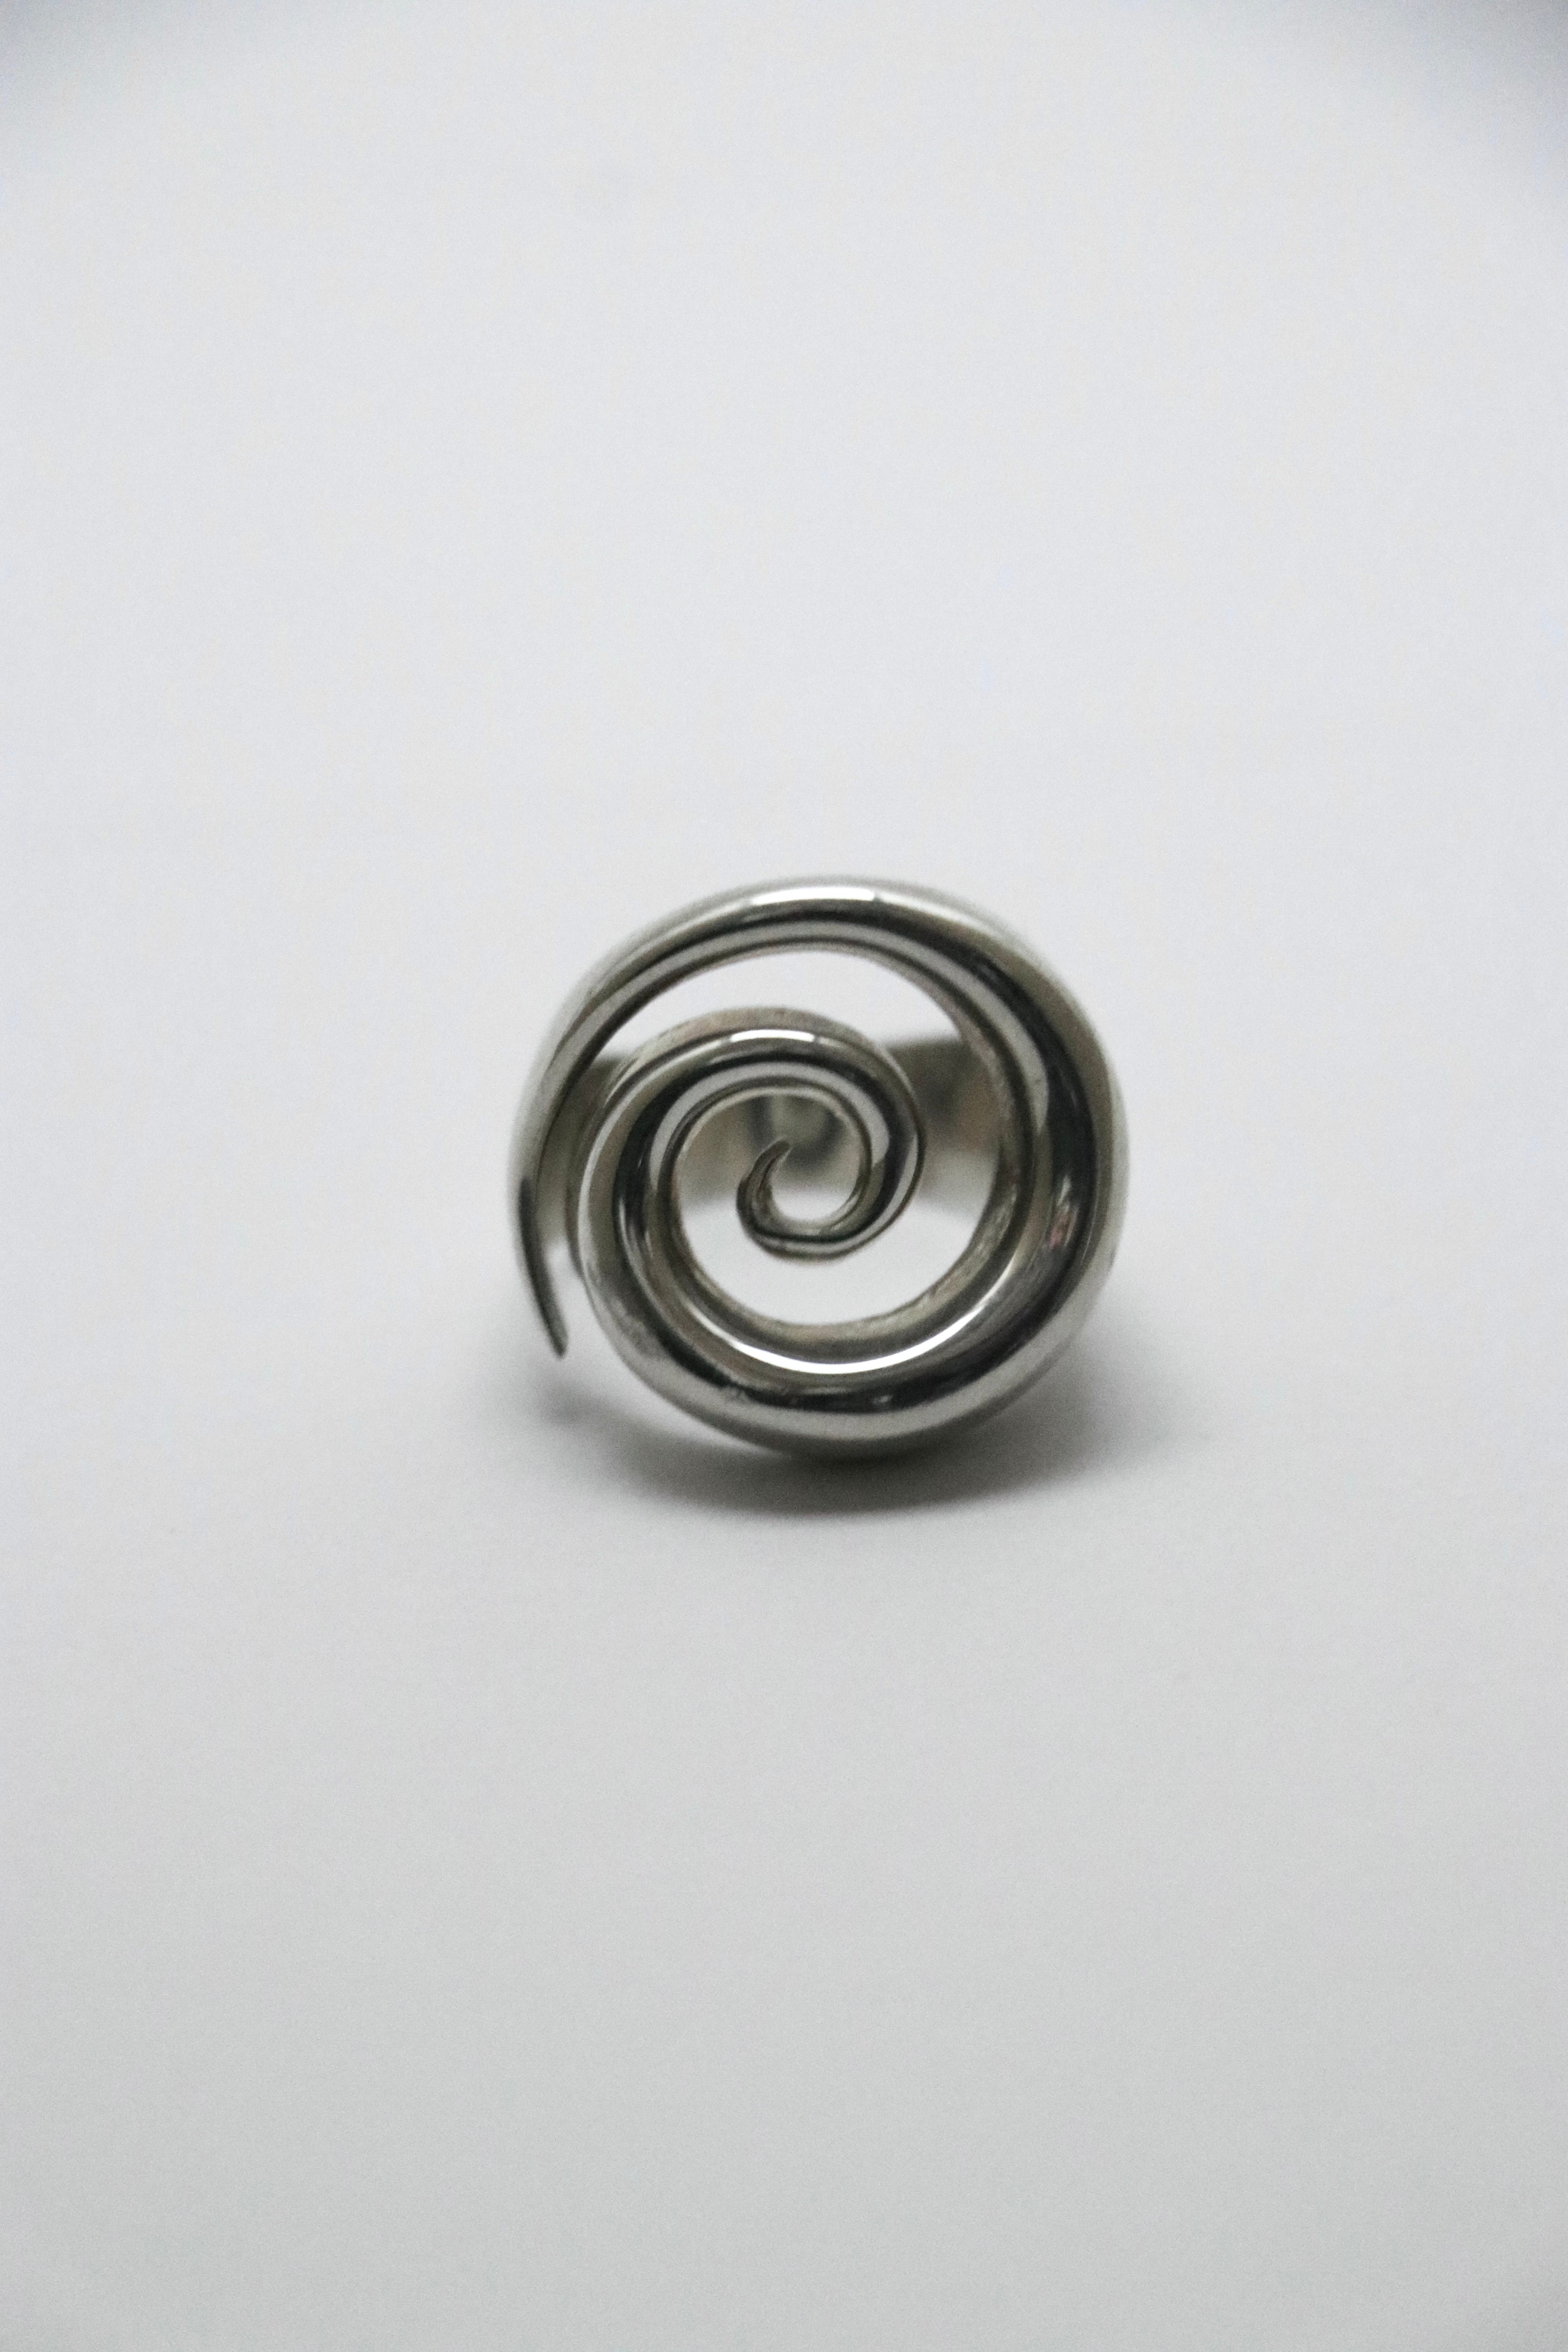 Le Chic Radical Spiral ring | remixstore powered by BASE